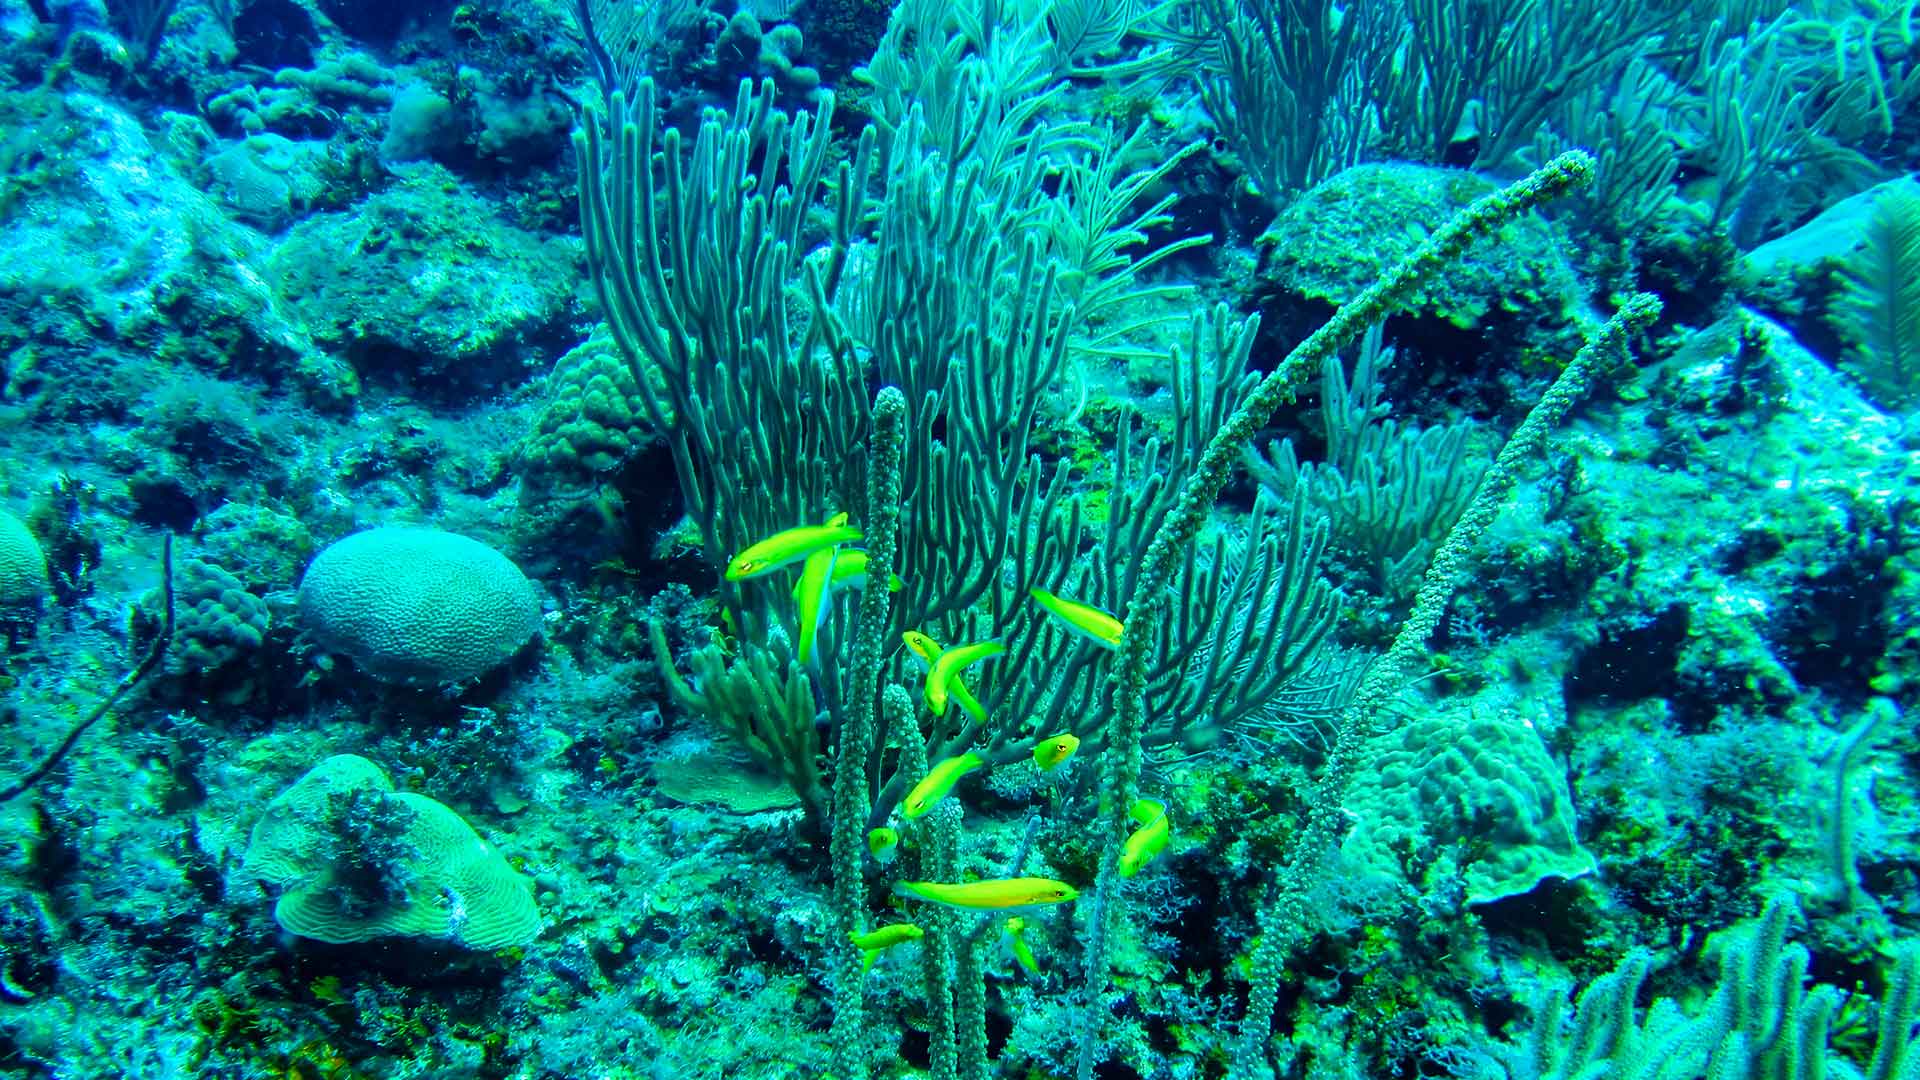 The vibrant and diverse underwater scene at the Belize Barrier Reef features colorful coral formations and tropical fish swimming amidst the clear blue waters.